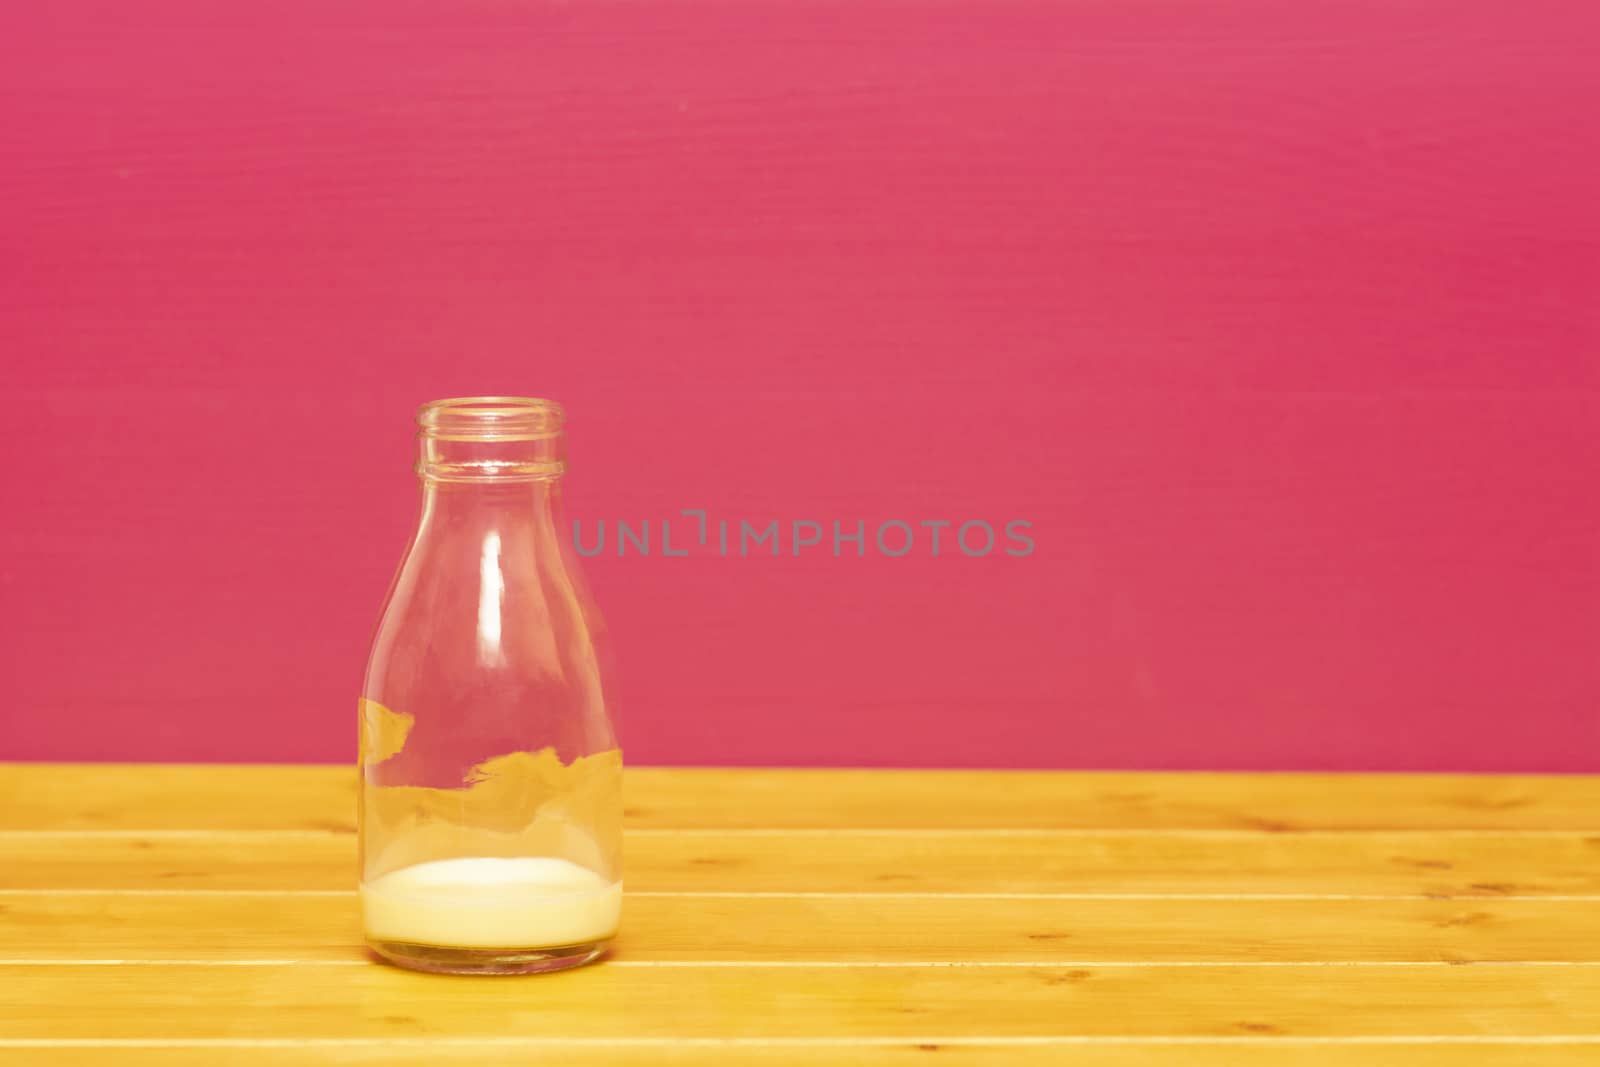 One-third pint glass milk bottle with dregs of banana milkshake, on a wooden table against a pink painted background